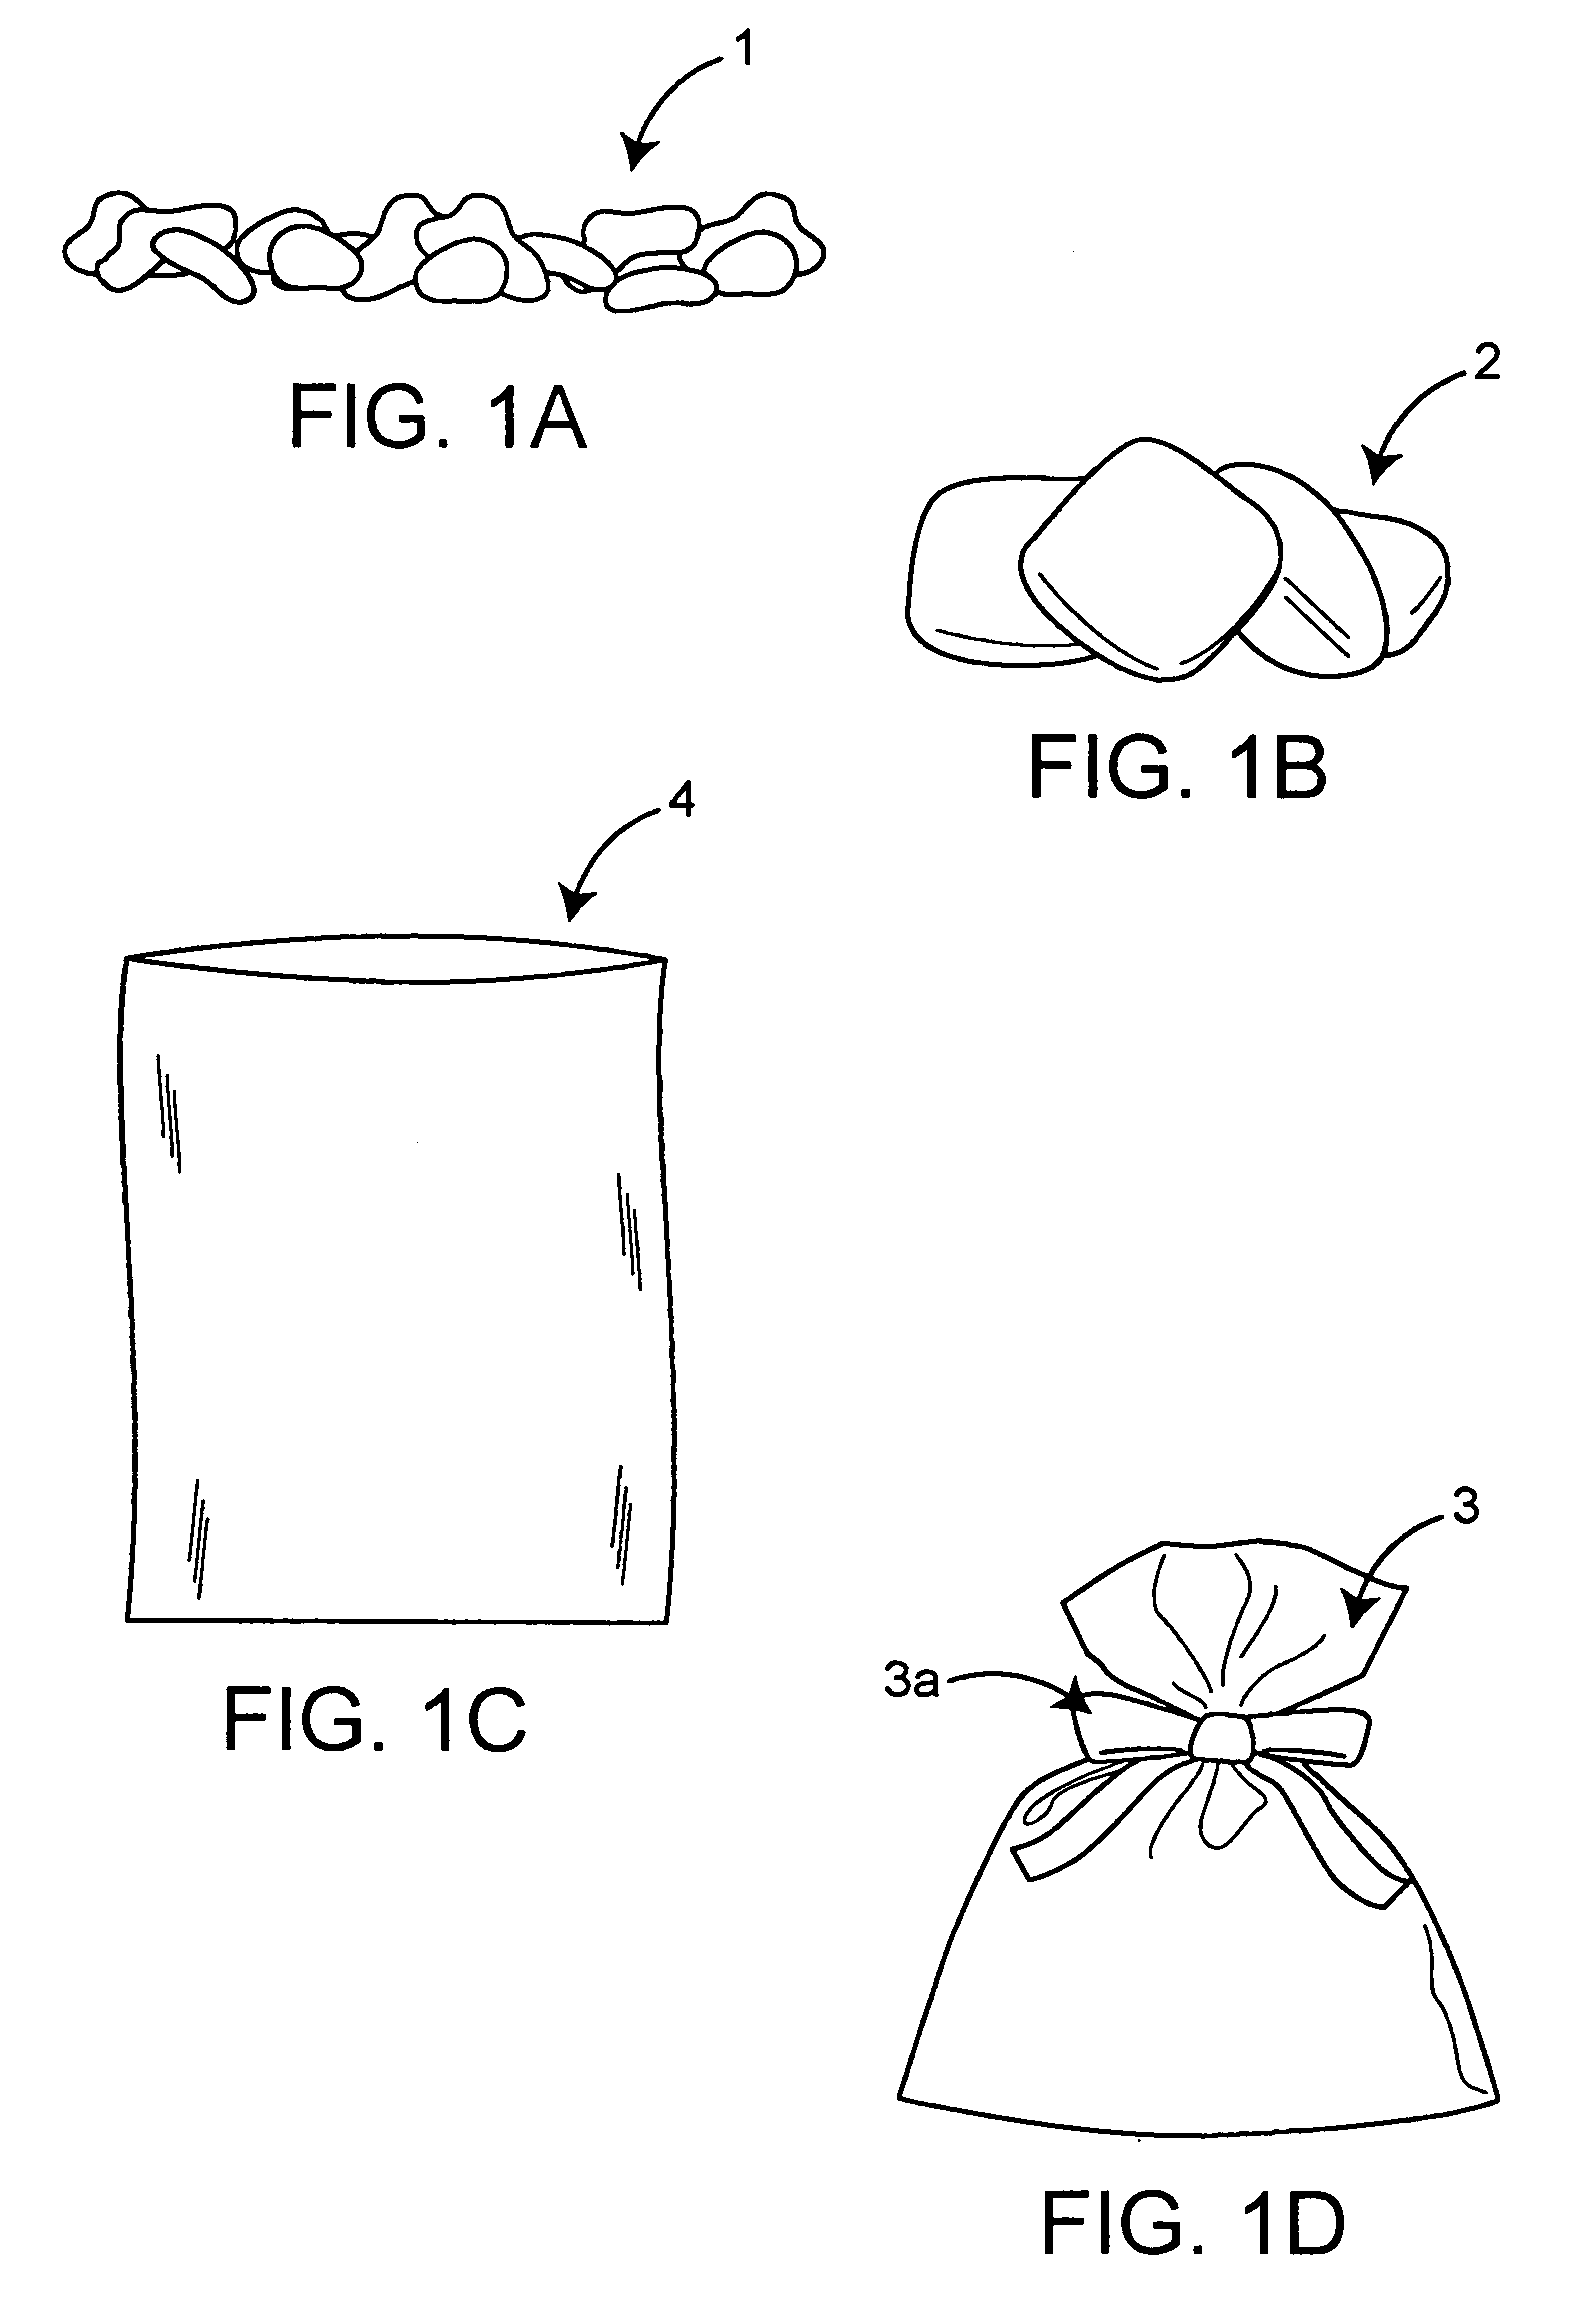 Method and apparatus for packaging charcoal fuel and other fuels for easy lighting